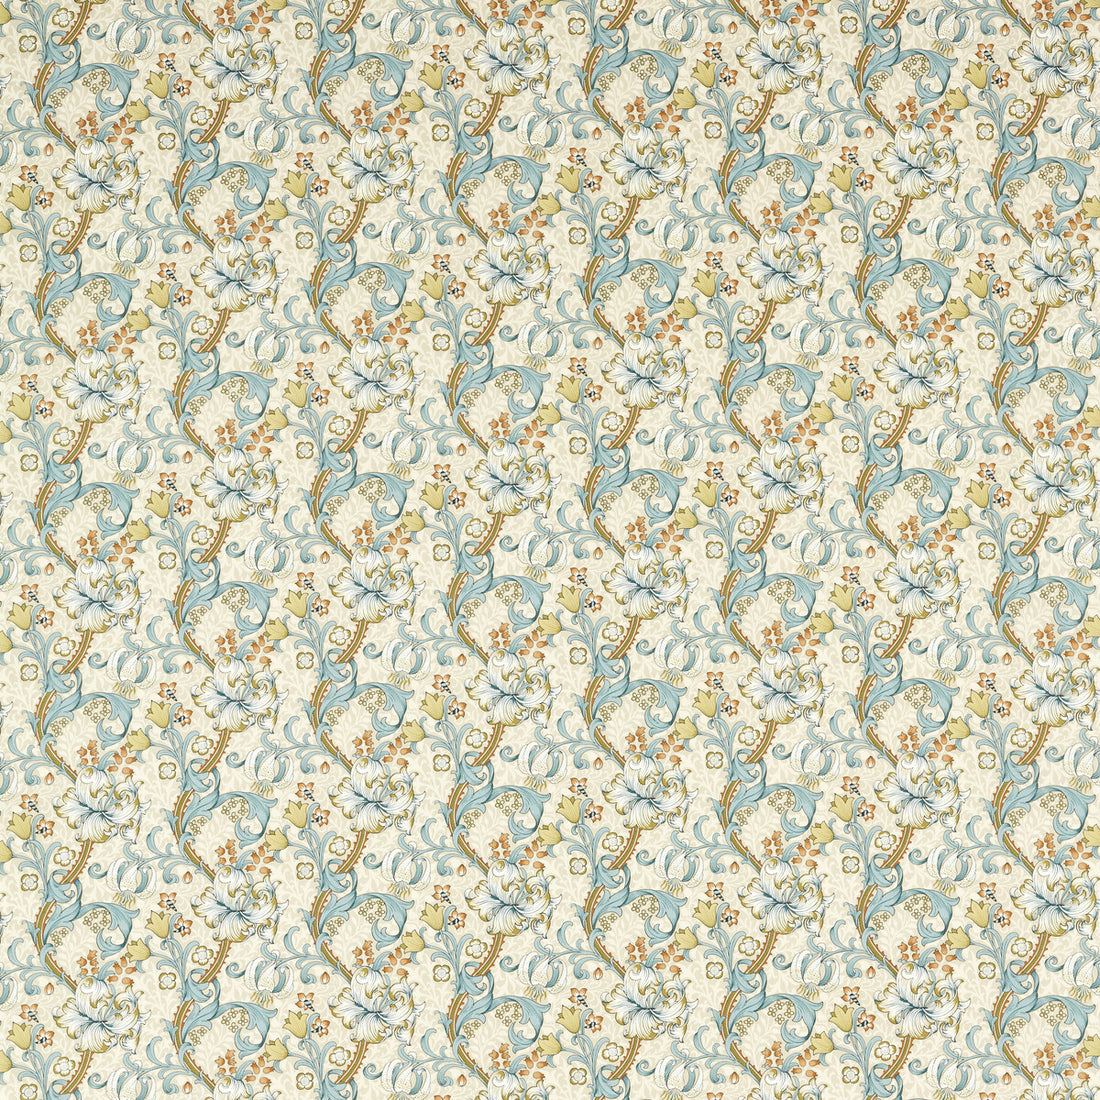 Golden Lily fabric in linen/teal color - pattern F1677/04.CAC.0 - by Clarke And Clarke in the Clarke &amp; Clarke William Morris Designs collection